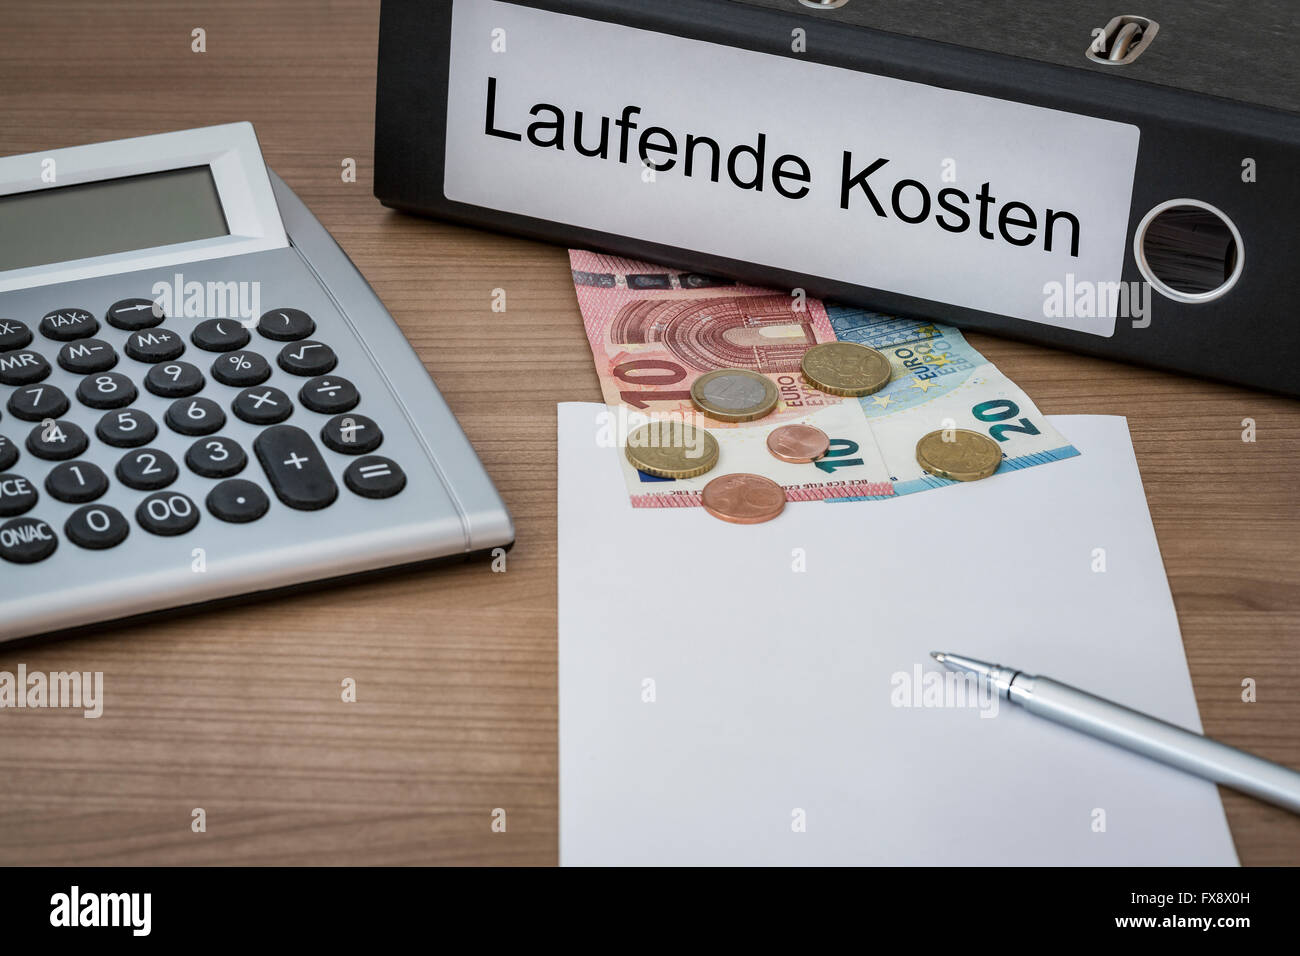 Laufende Kosten (German Running costs) written on a binder on a desk with euro money calculator blank sheet and pen Stock Photo